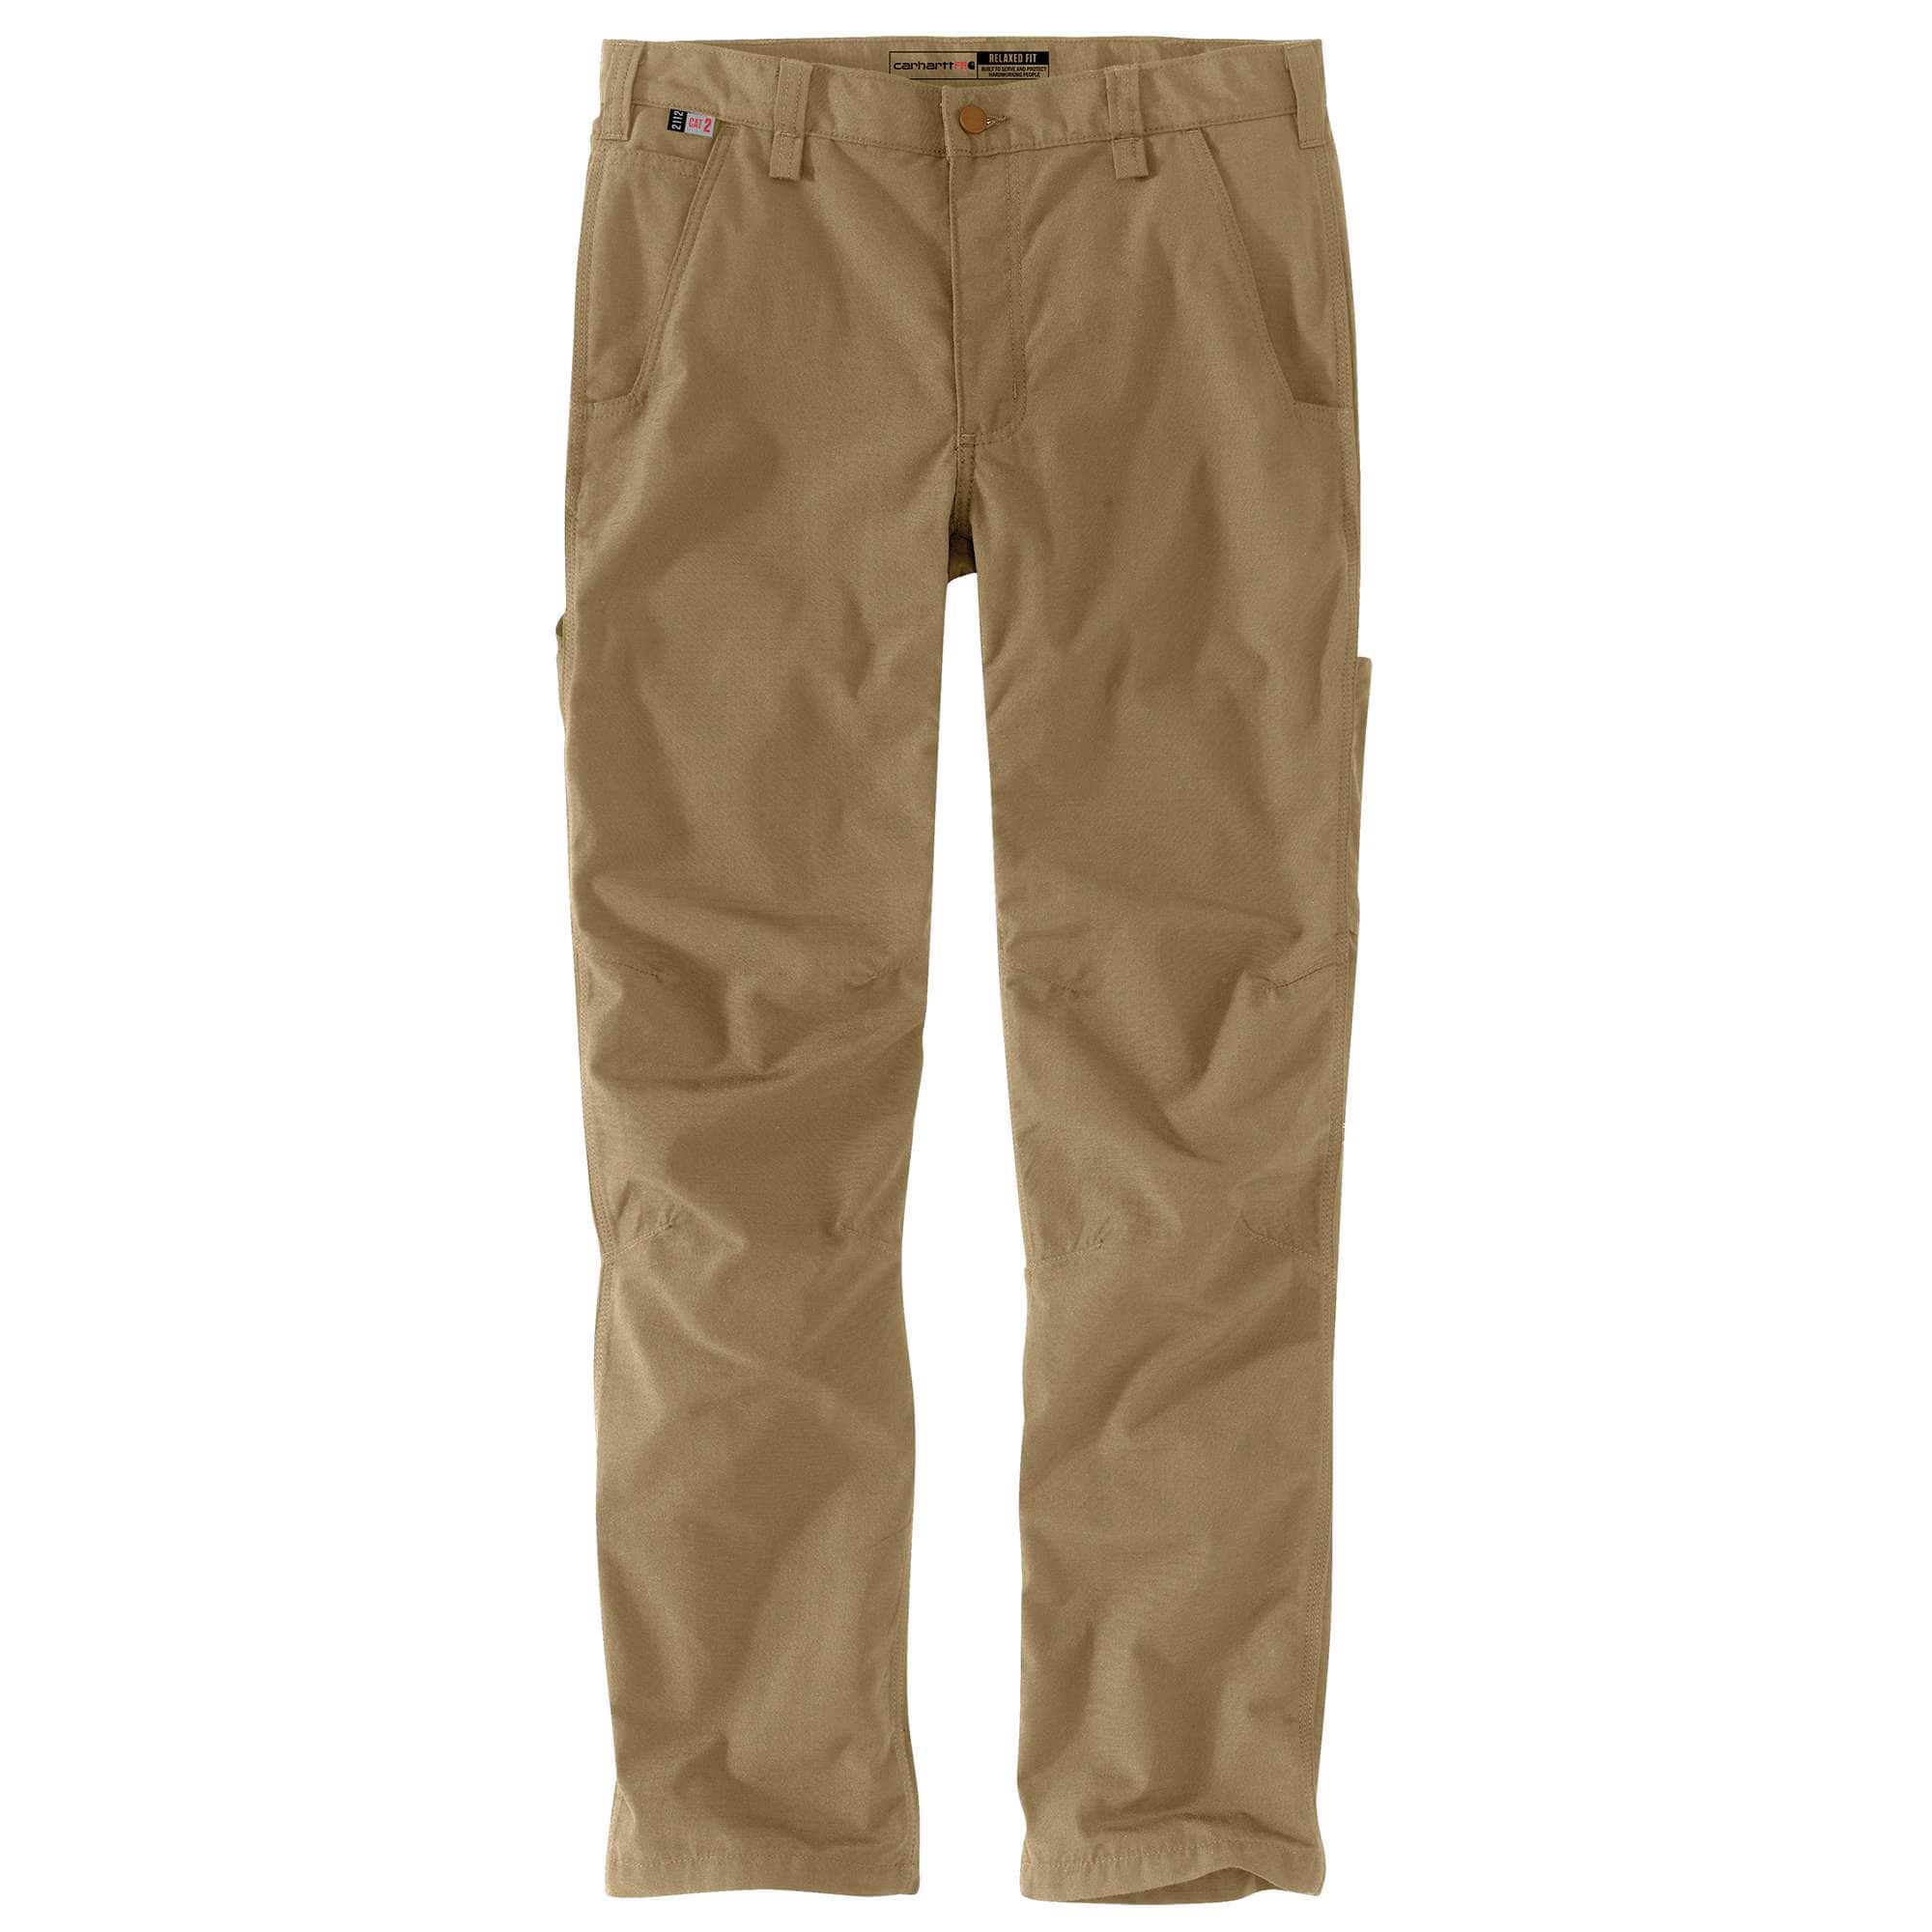 Carhartt Men's Deep Navy Flame-Resistant Carhartt Force® Relaxed Fit Ripstop Utility Work Pant